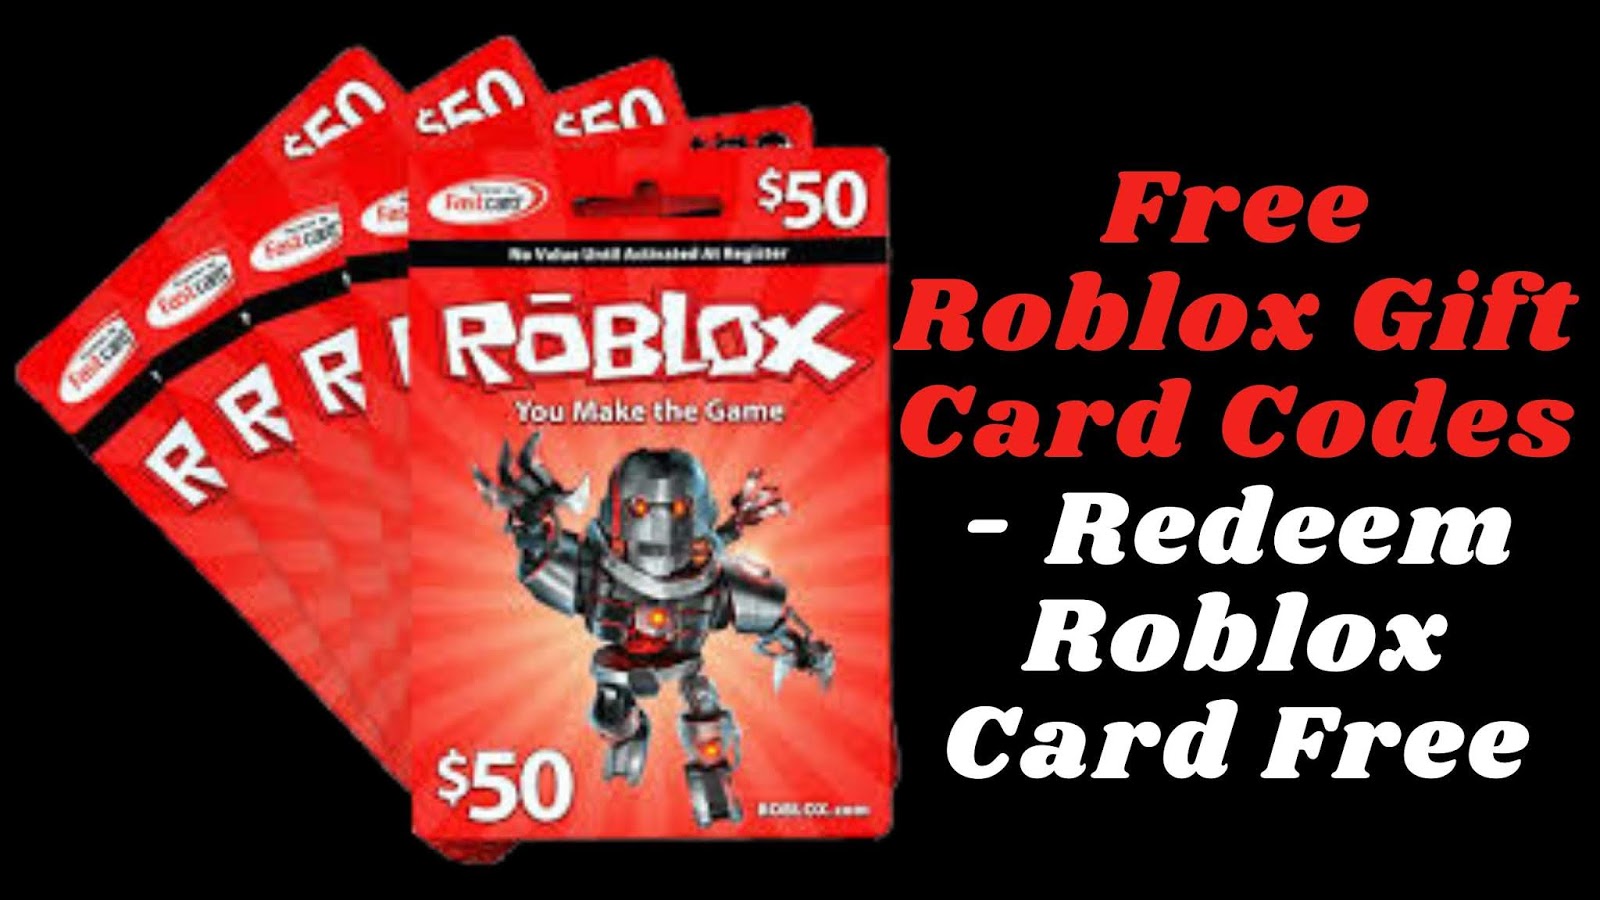 Free Gift Cards Free Roblox Gift Card Codes Redeem Roblox Card Free - roblox cards free